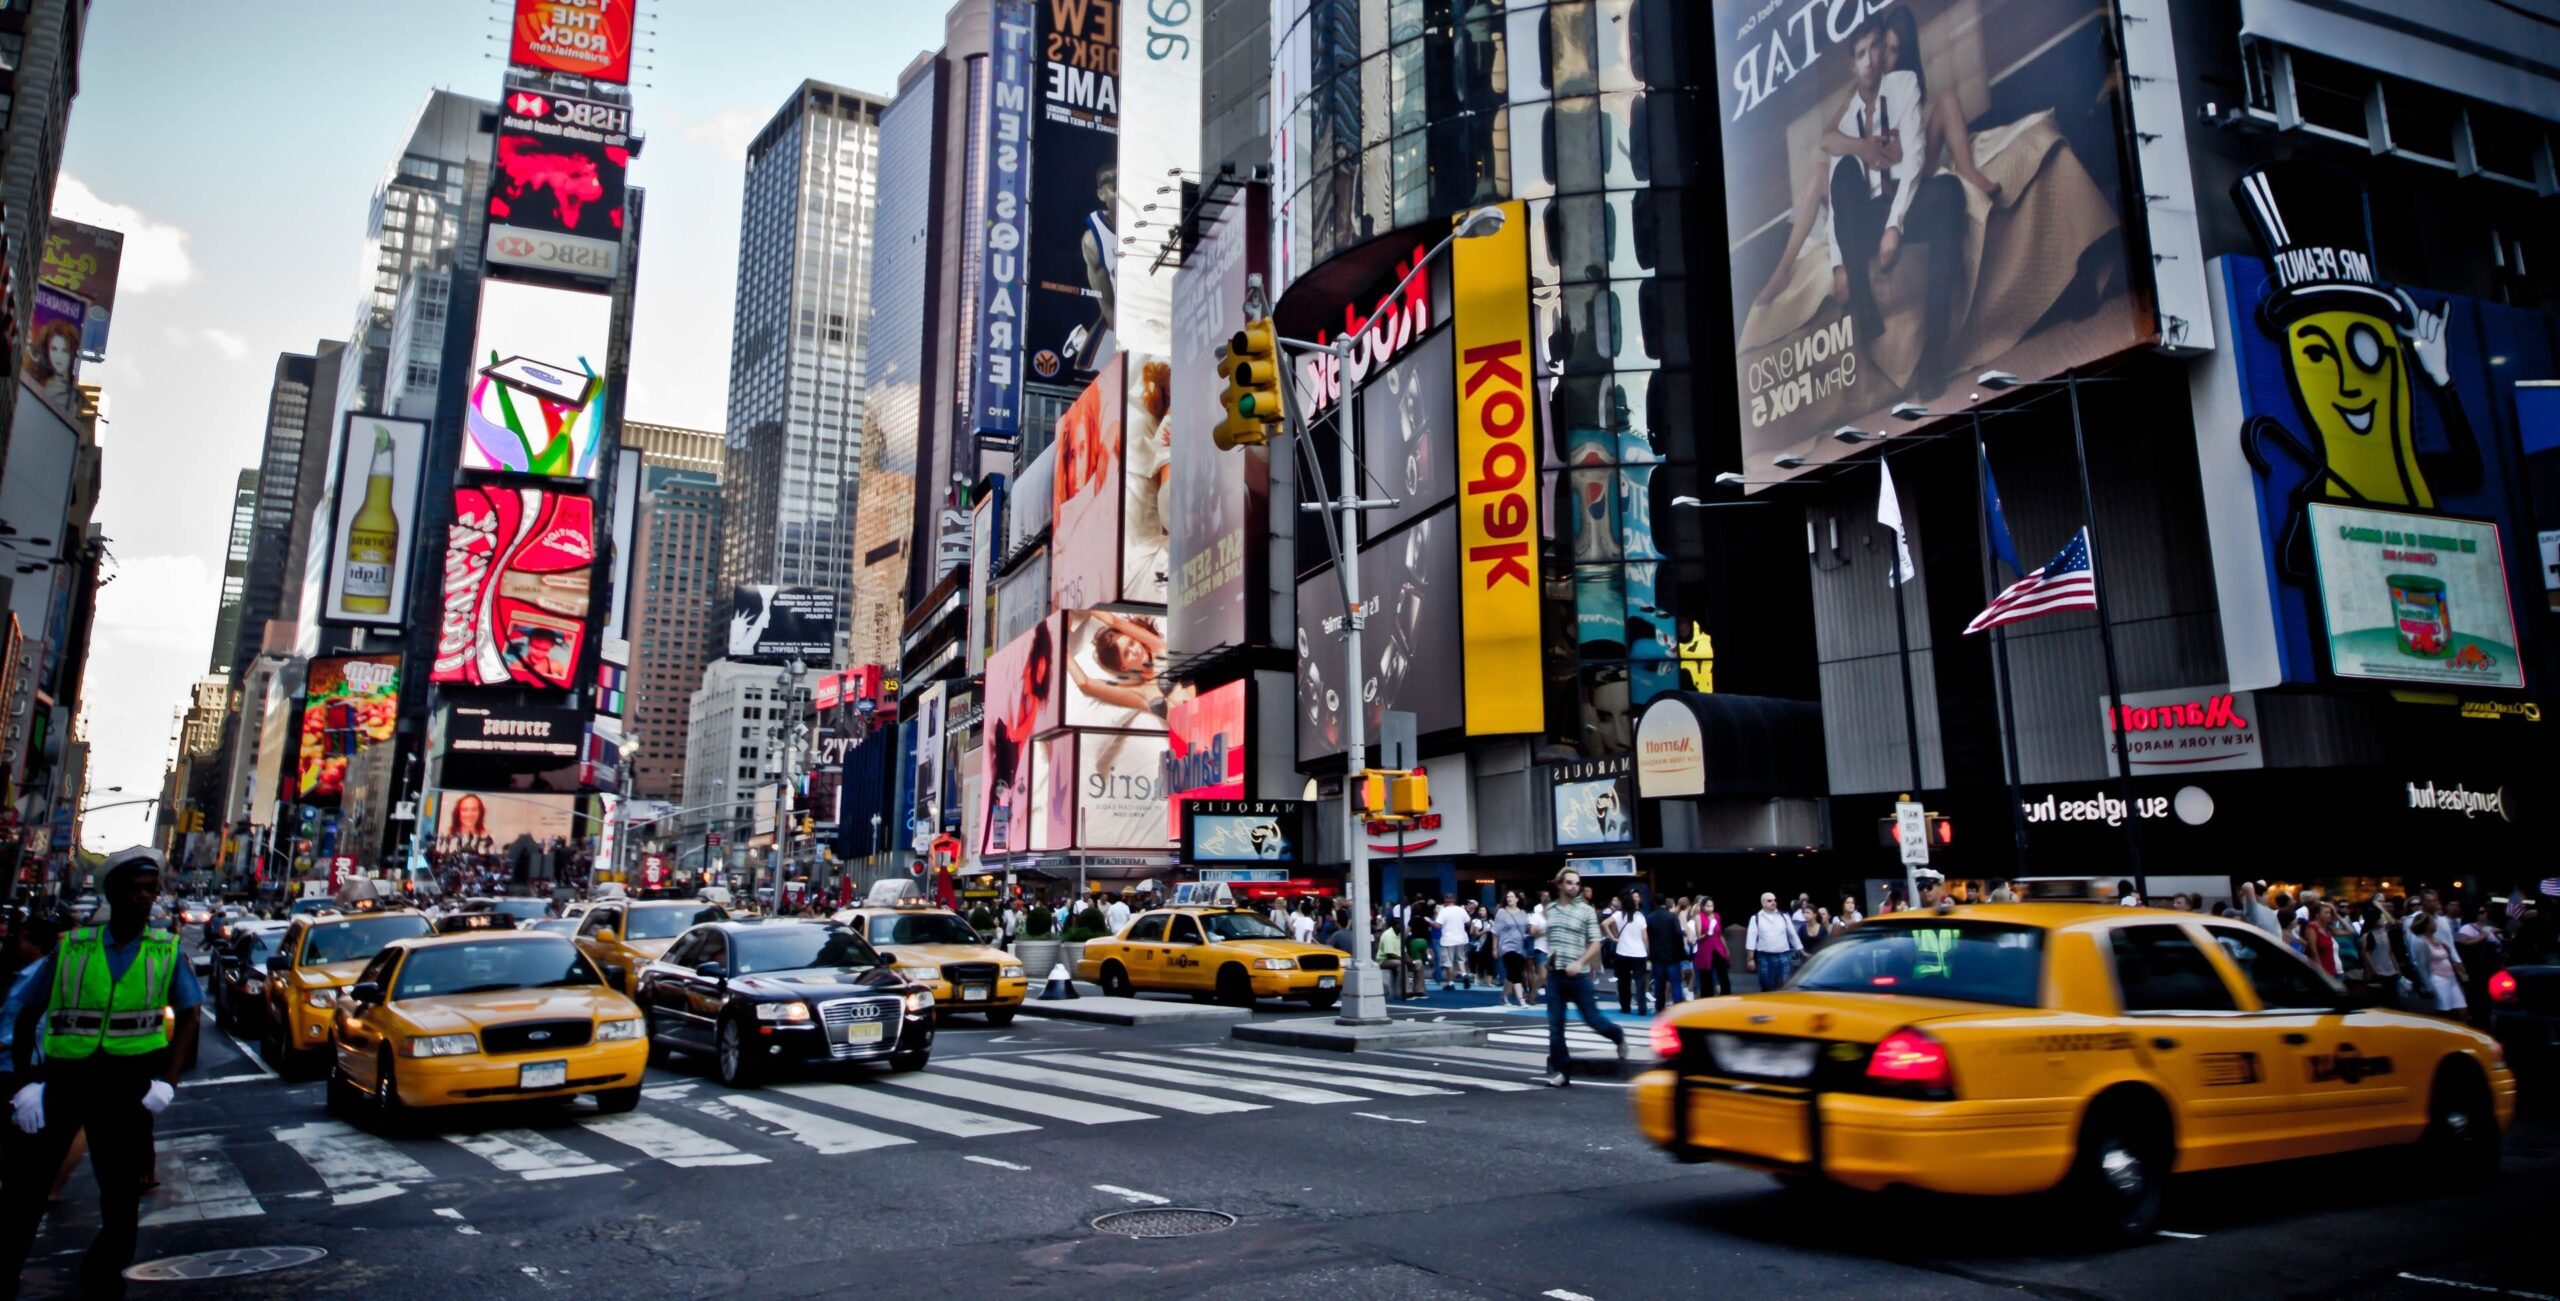 BEATBRDG Music Industry Internships - Visiting the iconic signs in Times Square in New York